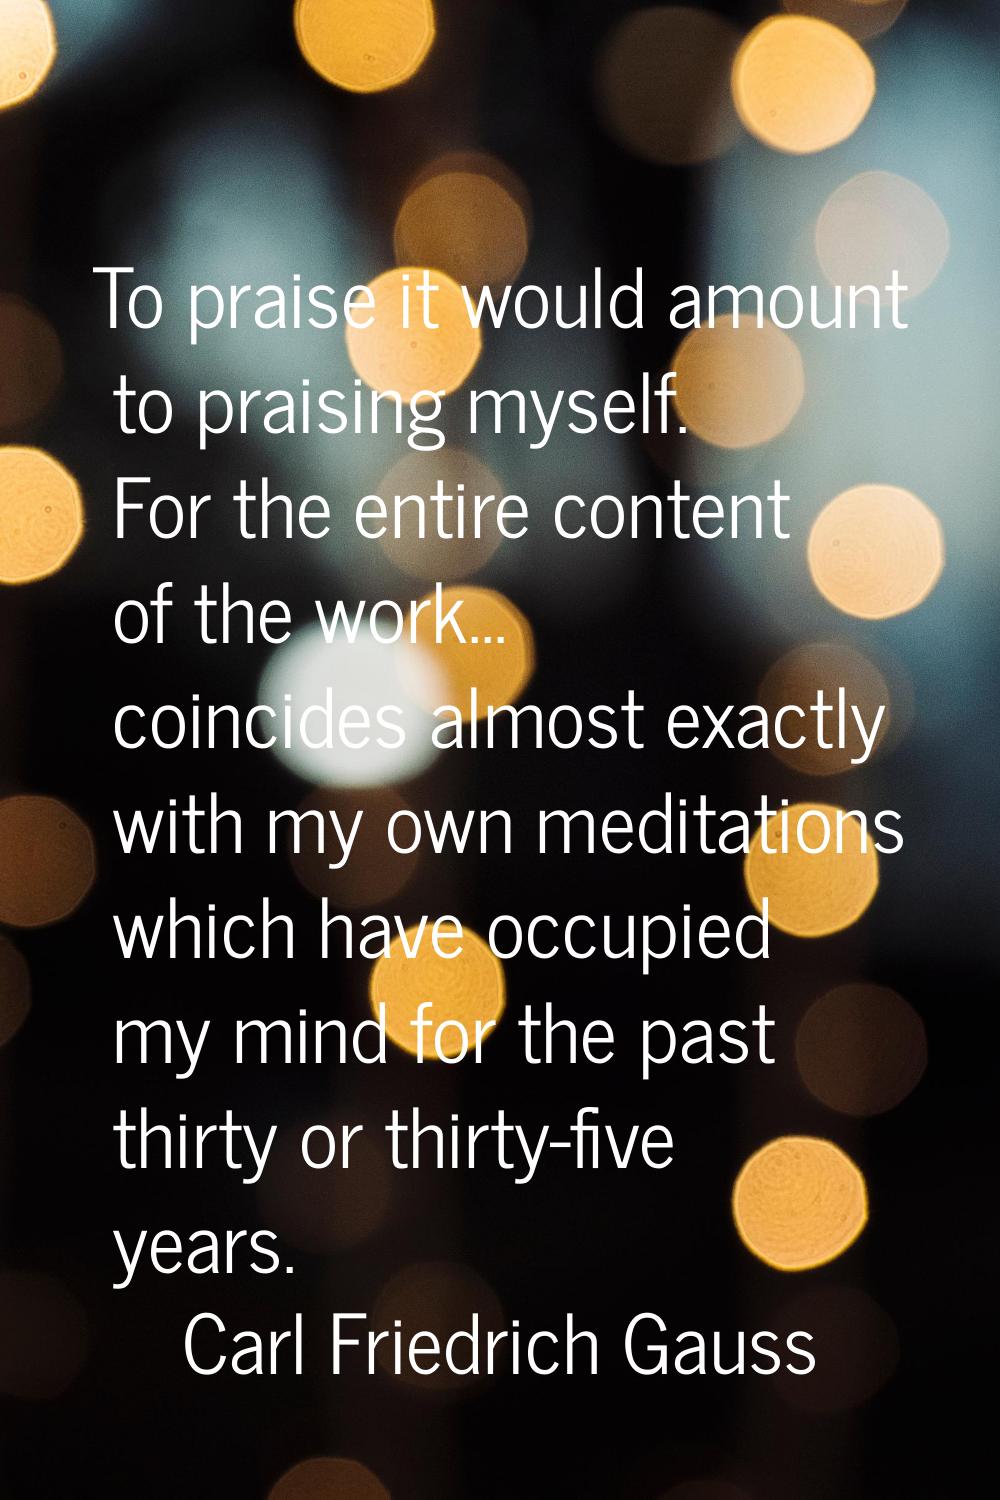 To praise it would amount to praising myself. For the entire content of the work... coincides almos